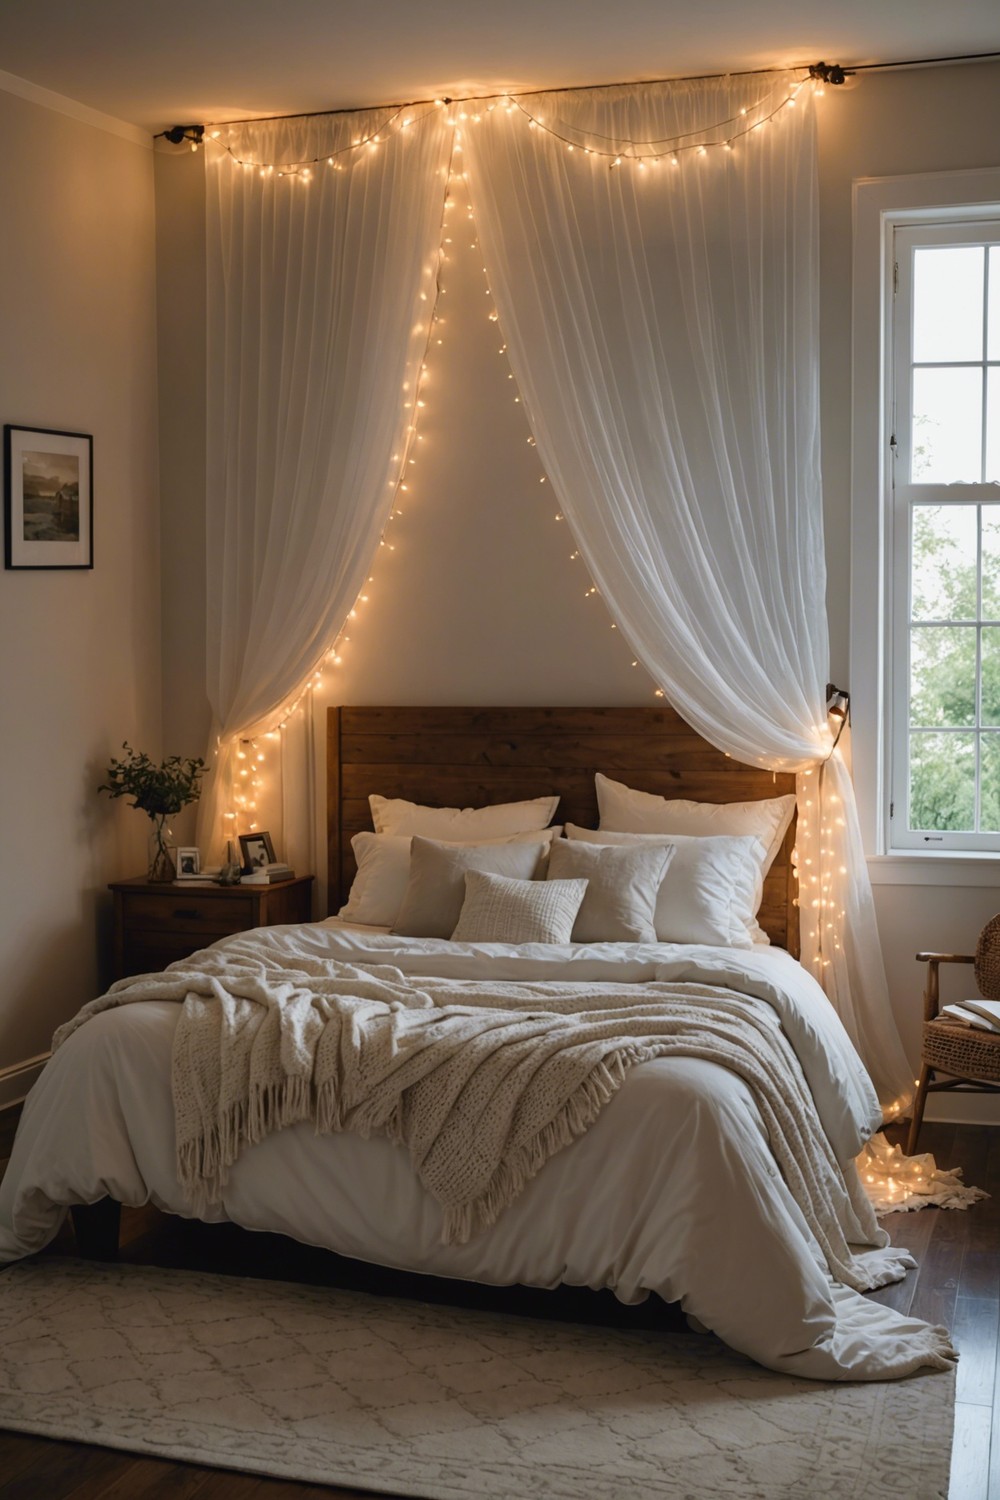 Create a Refreshing Ambiance with String Lights